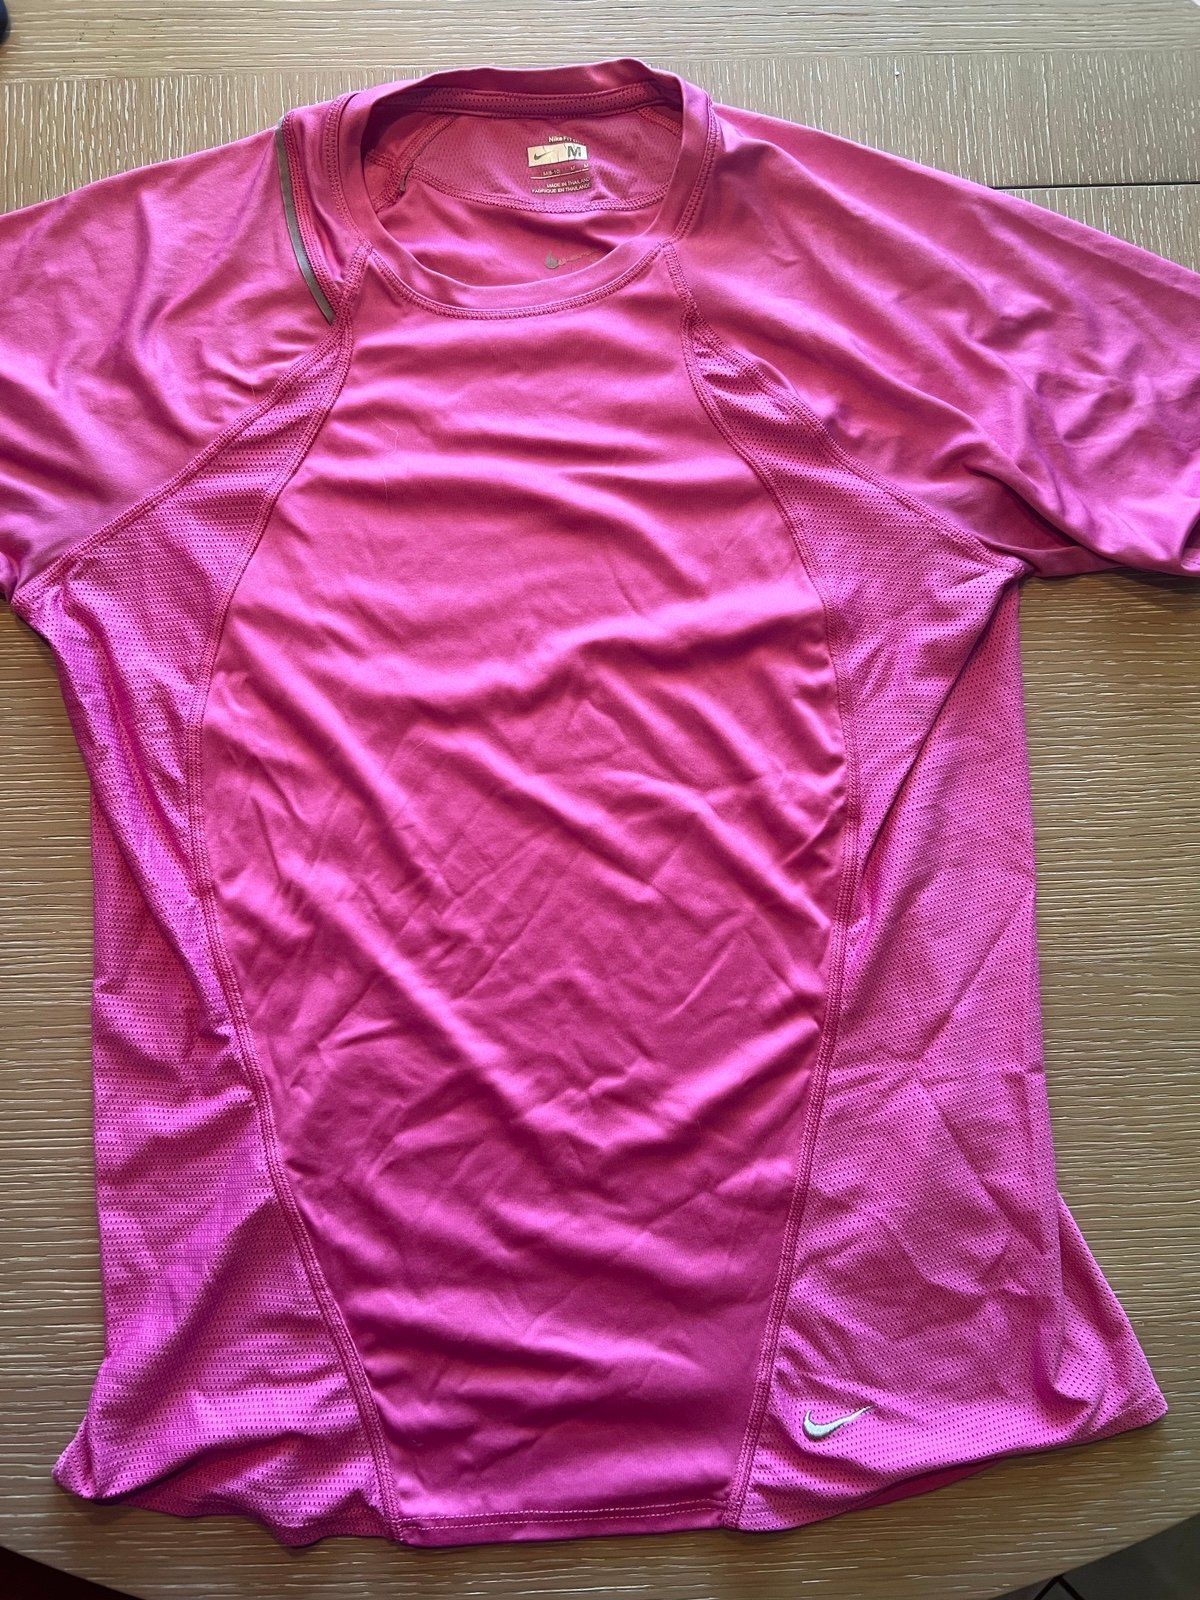 Special offer  Womens workout / athletic tops oIZzGCsd3 Great